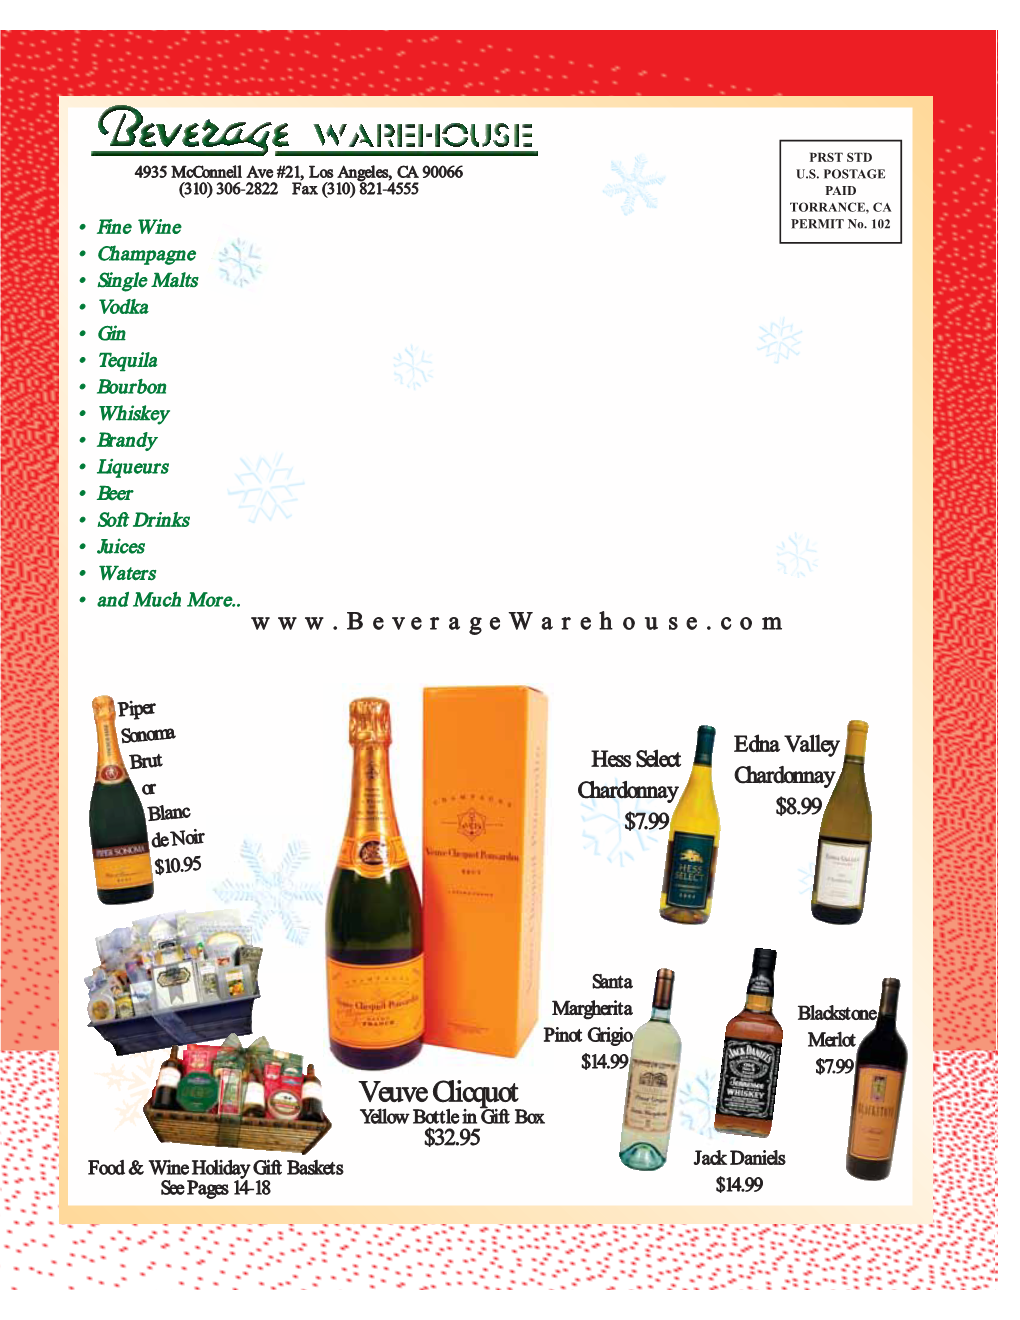 Veuve Clicquot Yellow Bottle in Gift Box $32.95 Food & Wine Holiday Gift Baskets Jack Daniels See Pages 14-118 $14.99 2005 Holiday Gift Giving Catalog